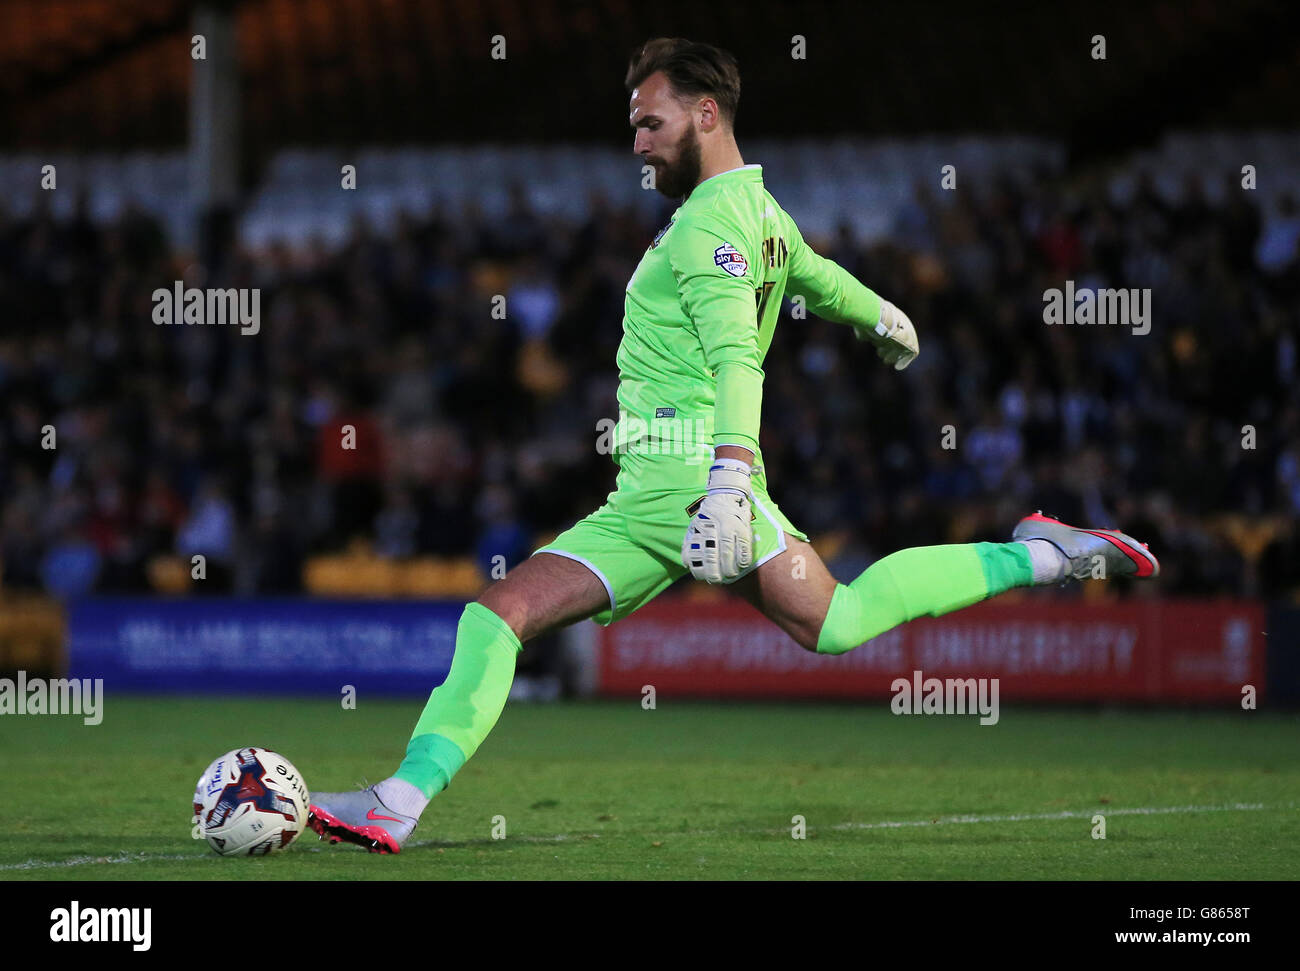 Port Vale goalkeeper Jak Alnwick during the Capital One Cup, First Round match at Vale Park, Stoke-on-Trent. Stock Photo